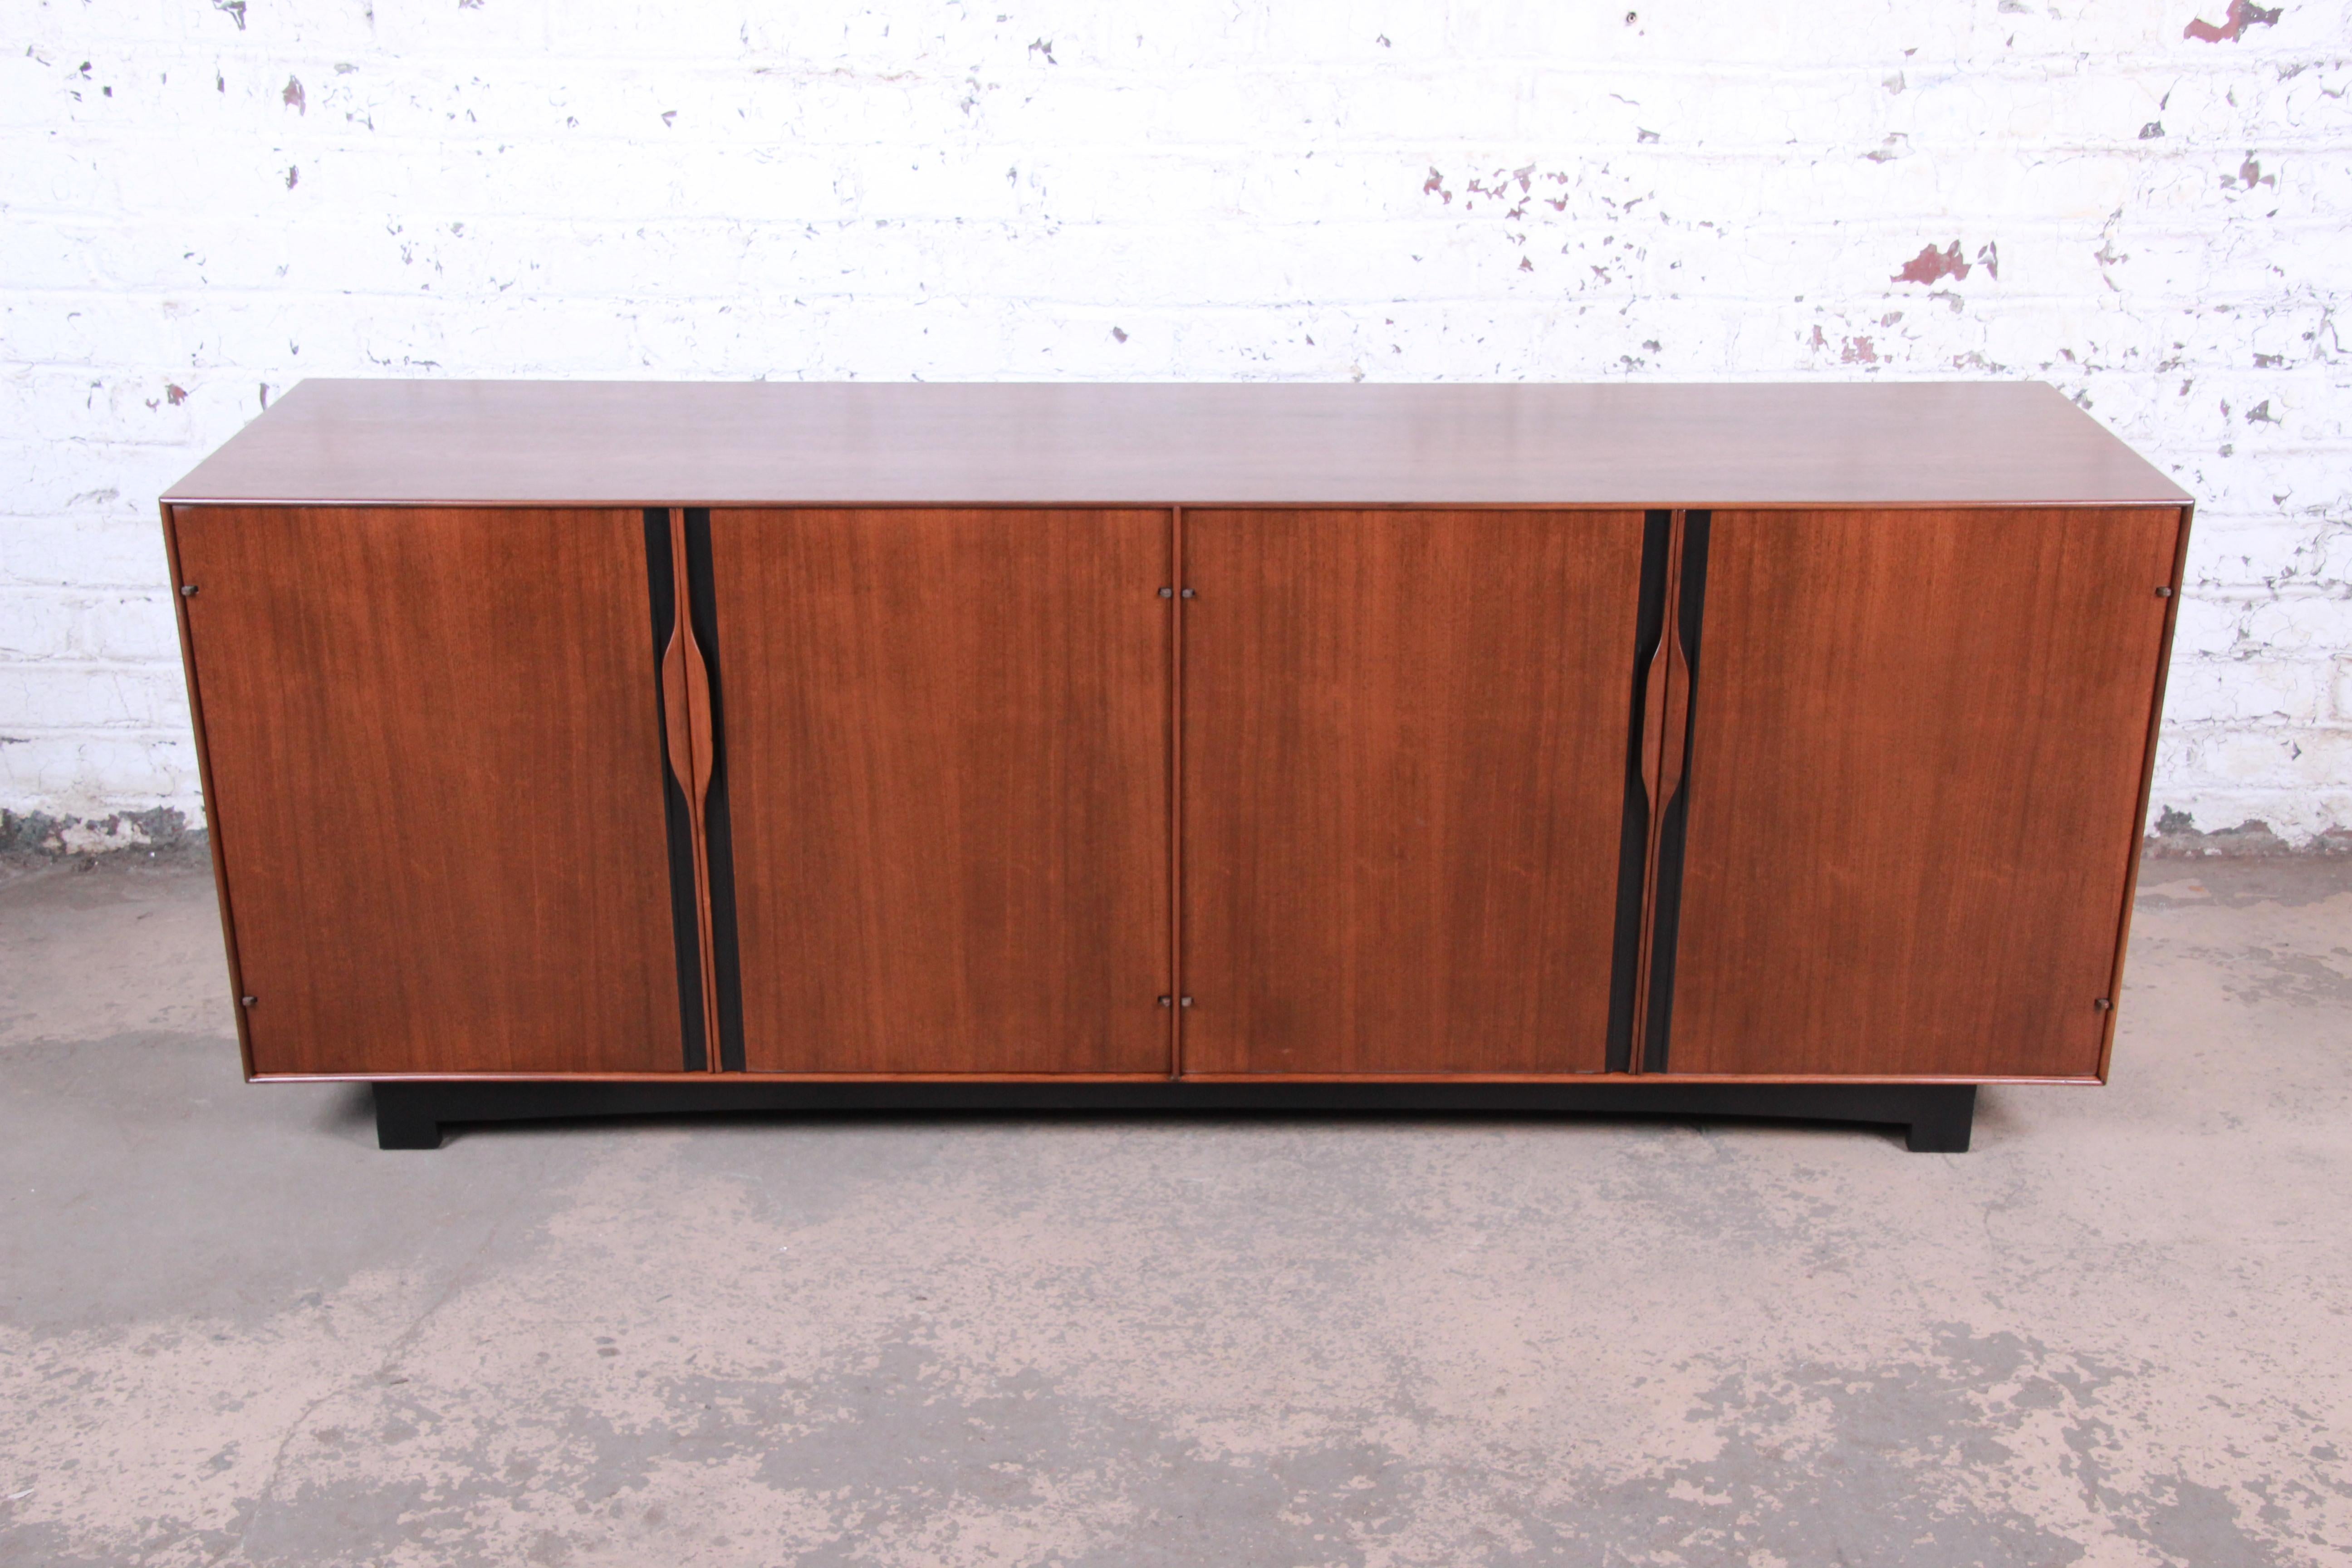 An exceptional Mid-Century Modern walnut sideboard credenza or bar cabinet

Designed by John Kapel for Glenn of California and retailed by John Stuart

USA, 1960s

Walnut and ebonized wood

Measures: 80